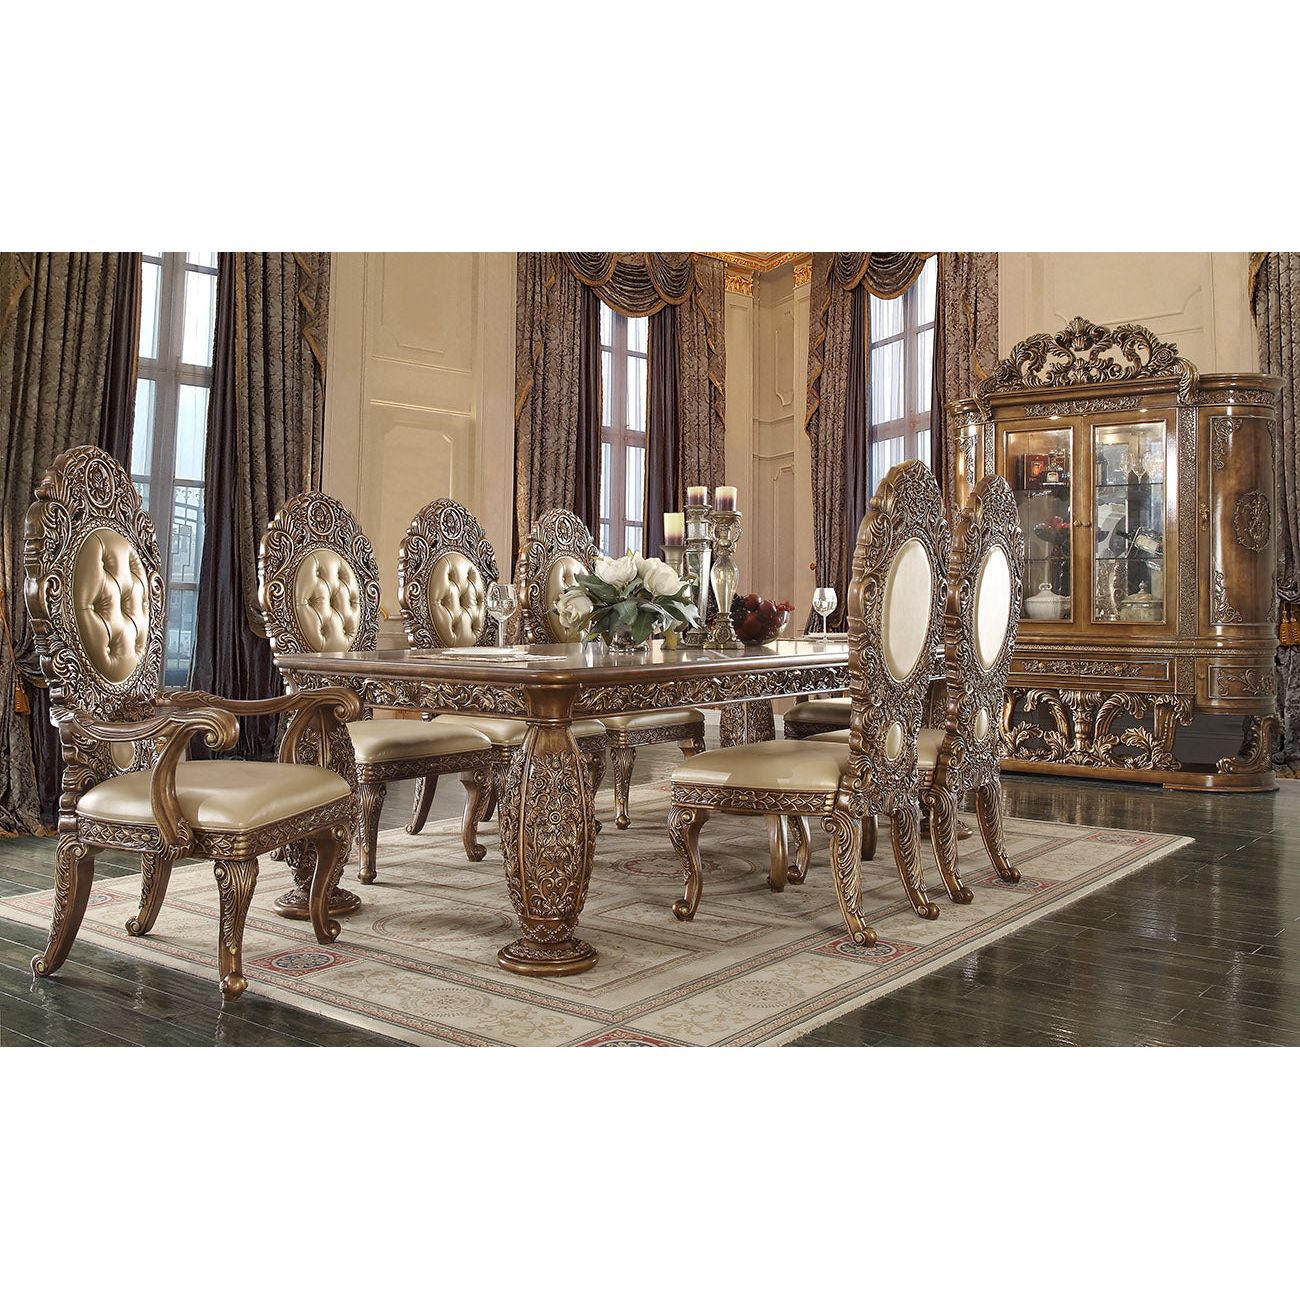 Homey Design HD-8018 - 7PC DINING TABLE SET - New Star Living